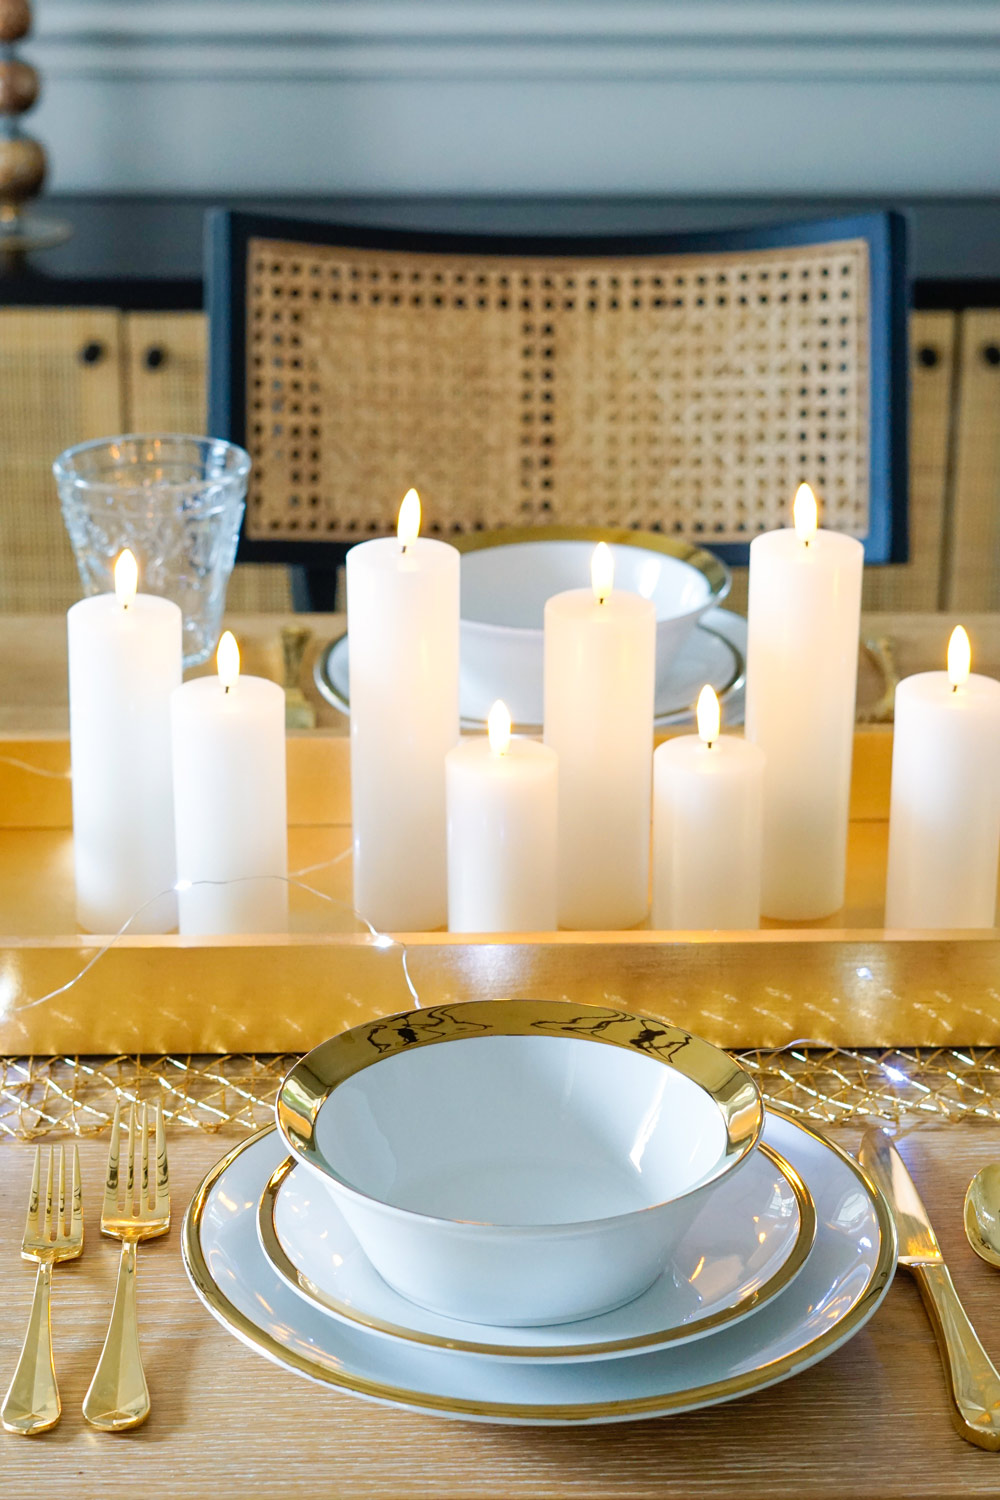 Gold Home Accessories - Fashionable Hostess